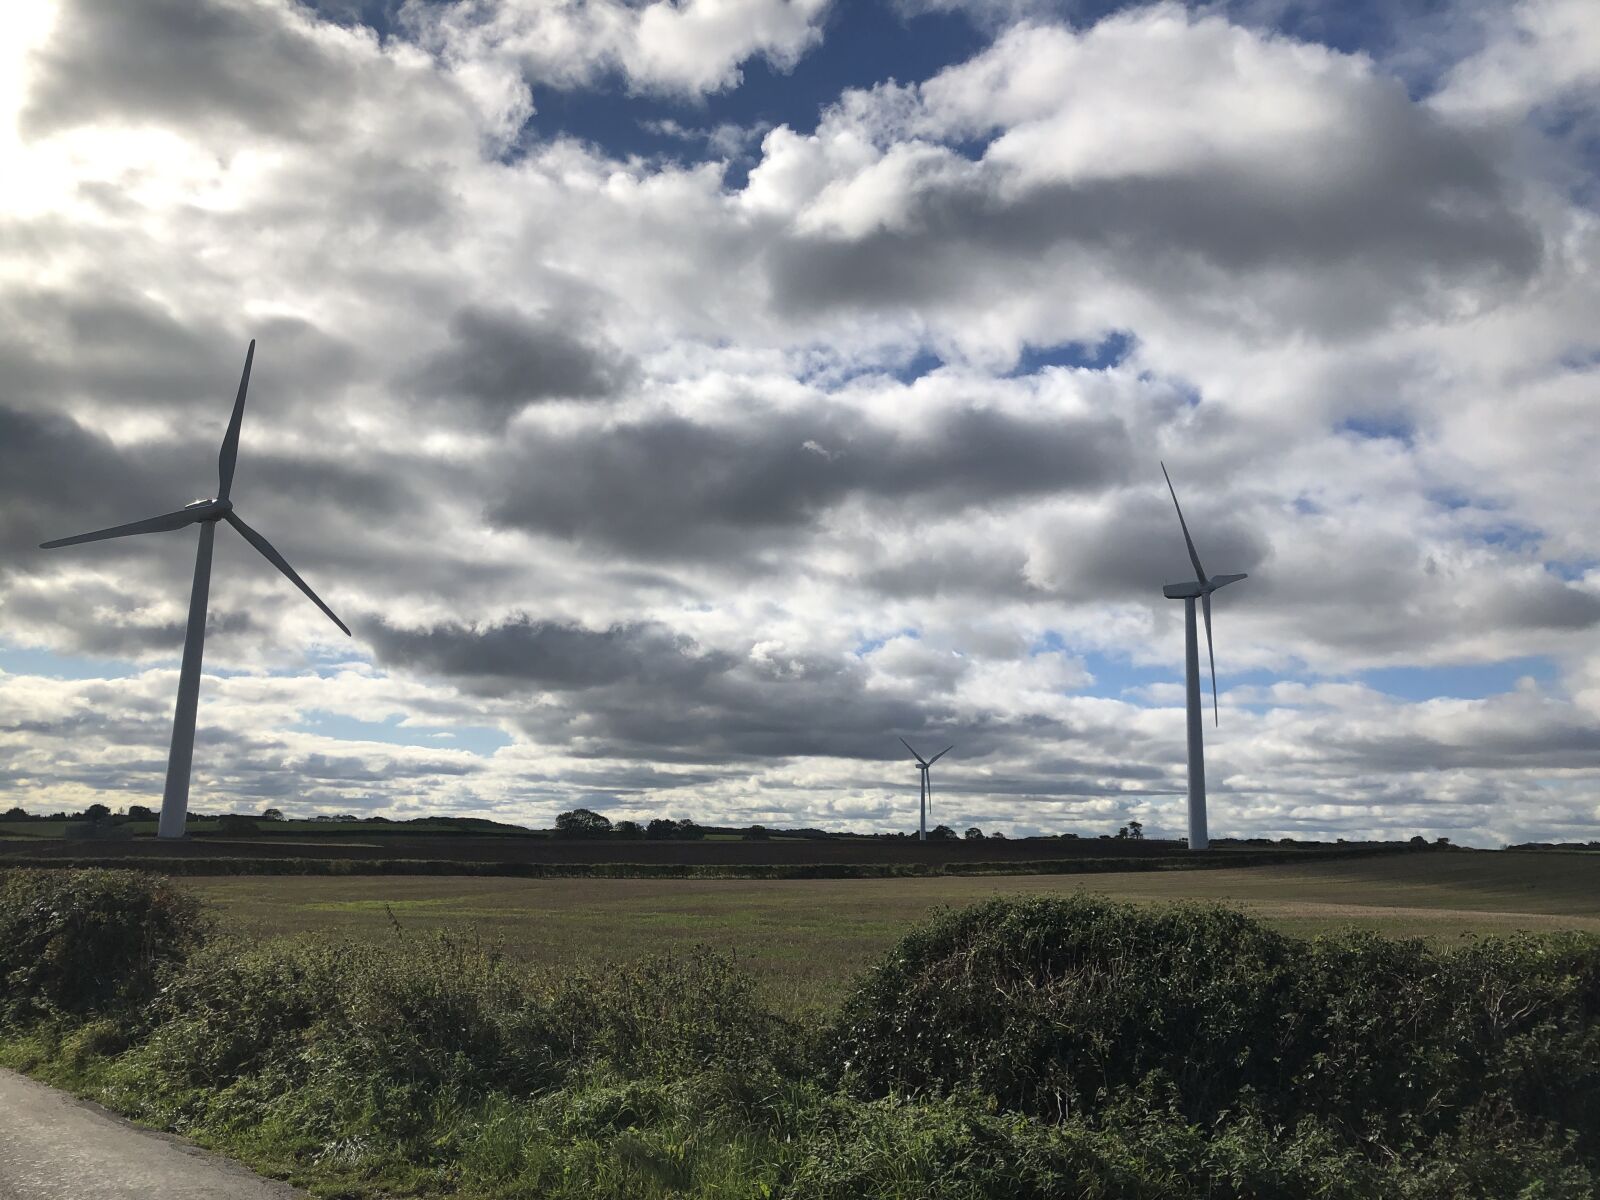 Apple iPhone 8 + iPhone 8 back camera 3.99mm f/1.8 sample photo. Environment, wind turbines, energy photography